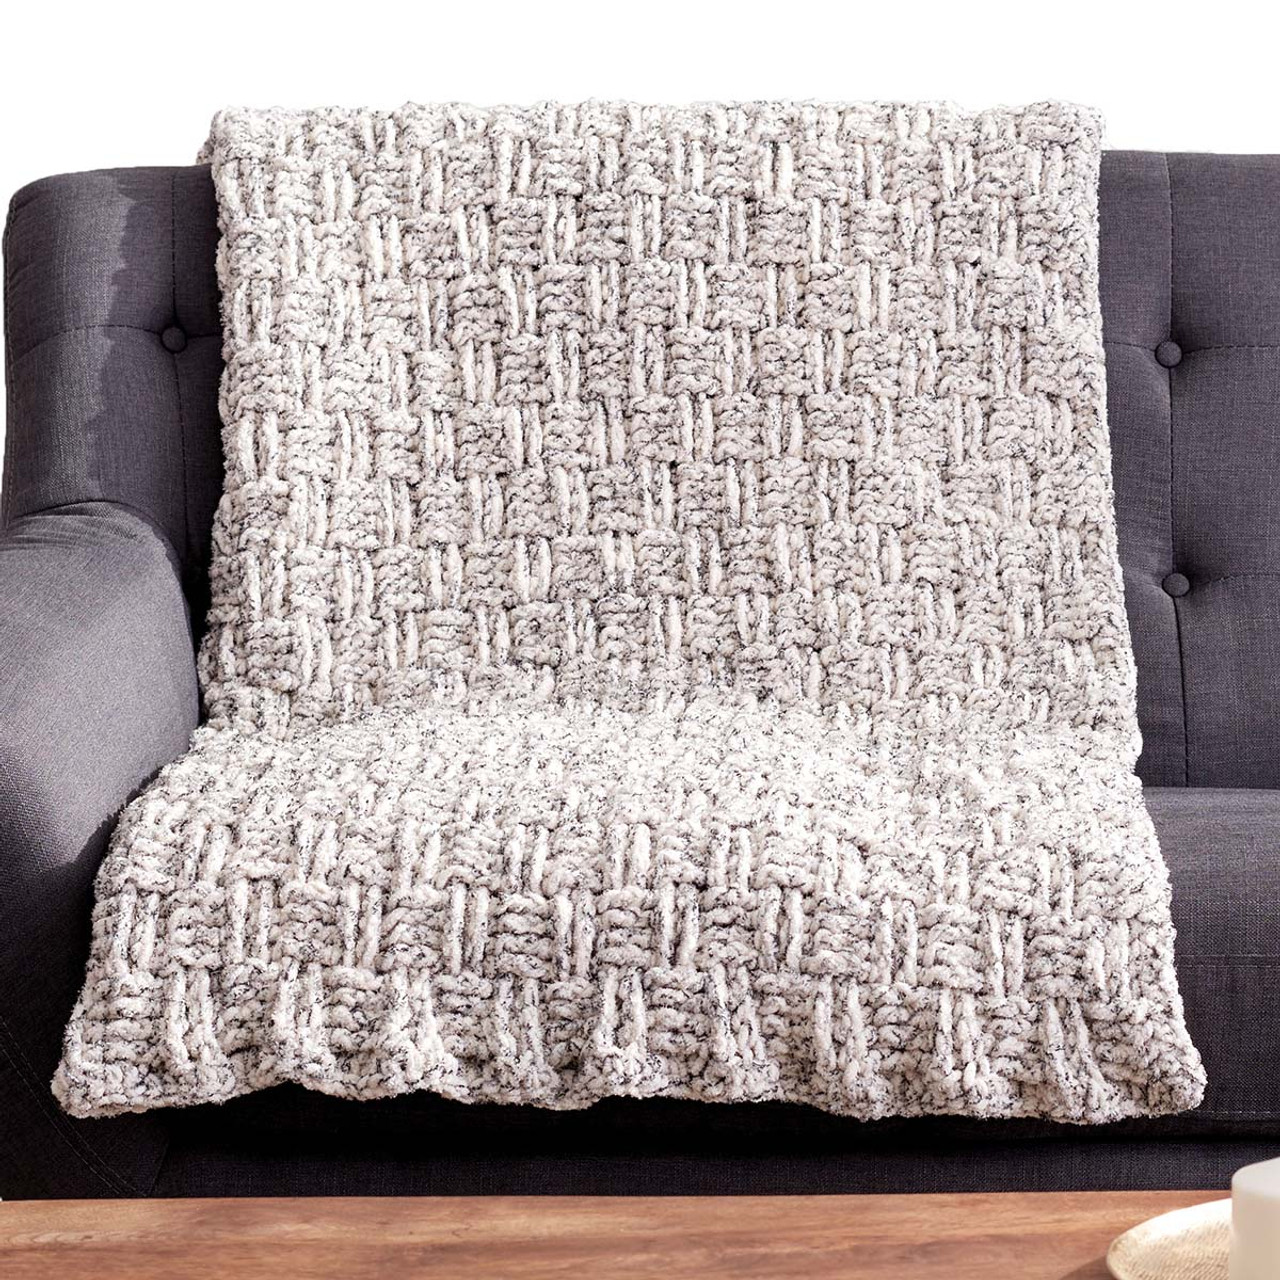 Woven Look Blanket Knitting Pattern – Mama In A Stitch